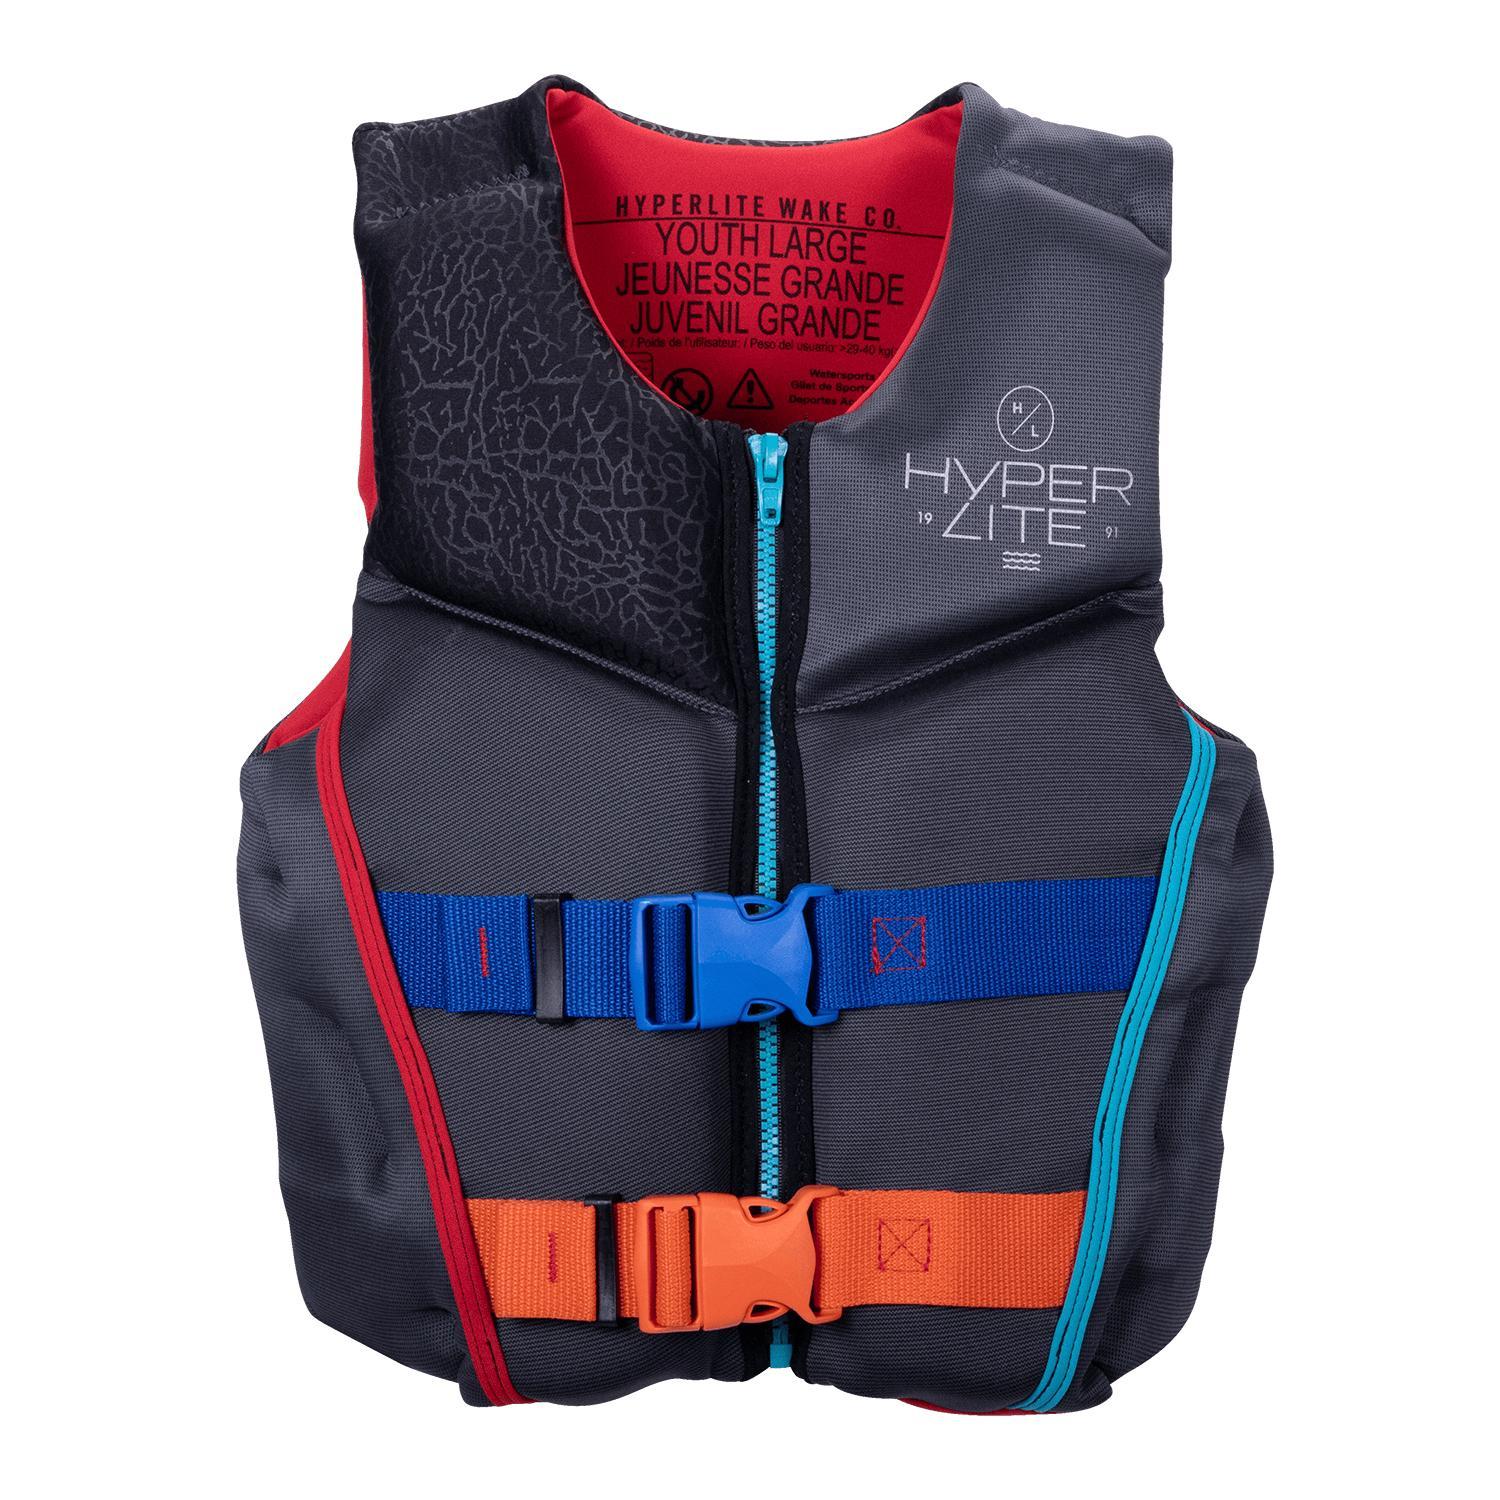  Hyperlite Boys ' Youth Indy Neo Cga Life Vest Large - 65- 90 Lbs